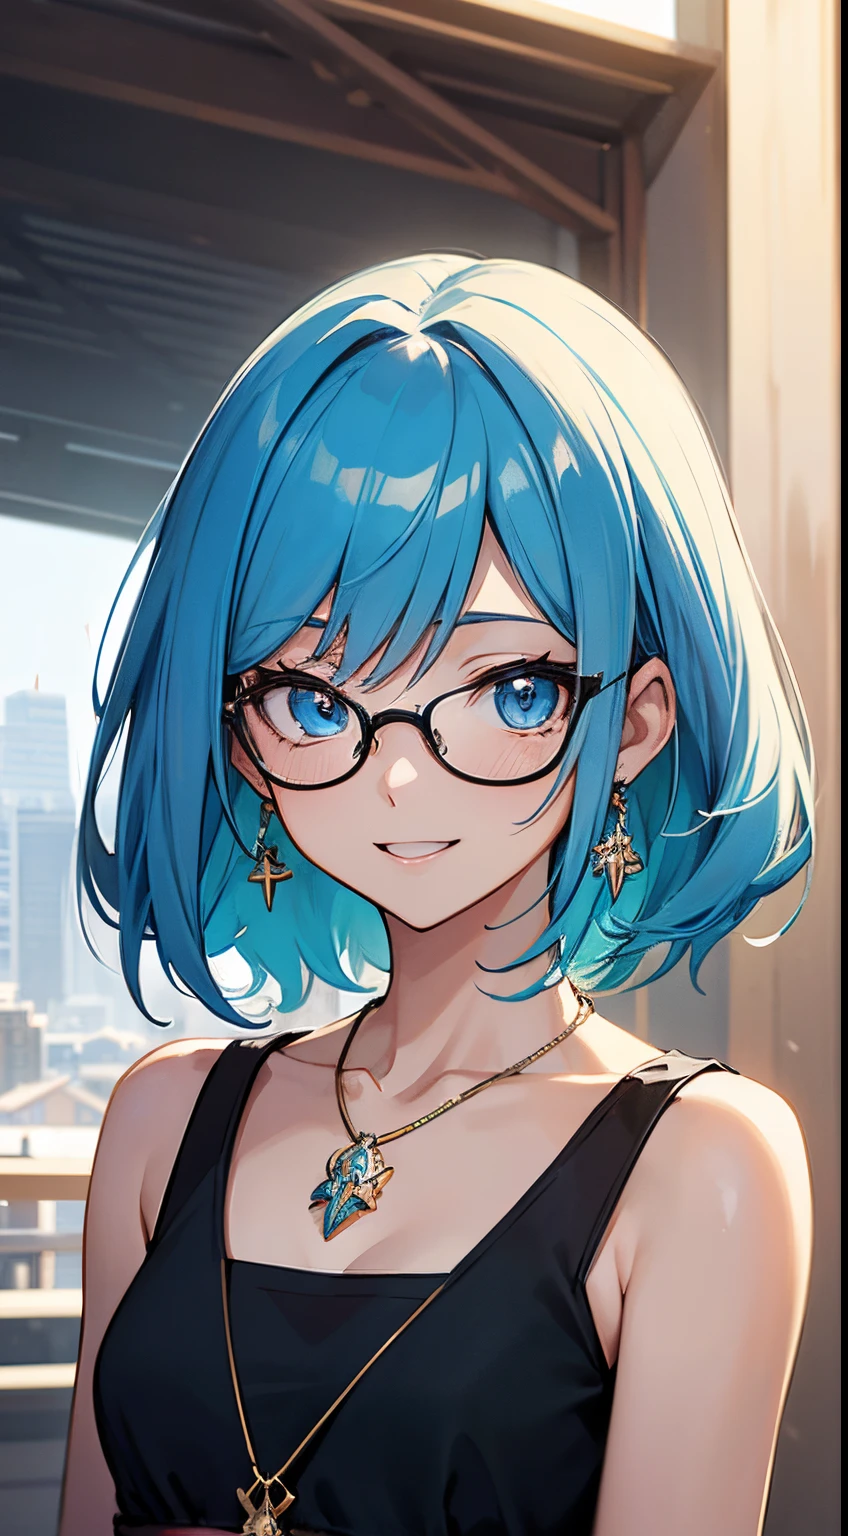 ((masutepiece)), ((Best Quality)), (Ultra-detailed), ((Extremely detailed)), ((UHD)), (8K), Best Quality, (Beautiful), Illustration, watercolor paiting, Anime style, Upper body, Colorful, pop, Focus on the face, city, Town, beautiful women, Solo, neon color, Beautiful BLUE hair, Beautiful dark blue eyes, ((Beautiful eyes)), sidetail, flat breast, tiny chest, Glasses, earrings, Necklace, Laugh Smile,